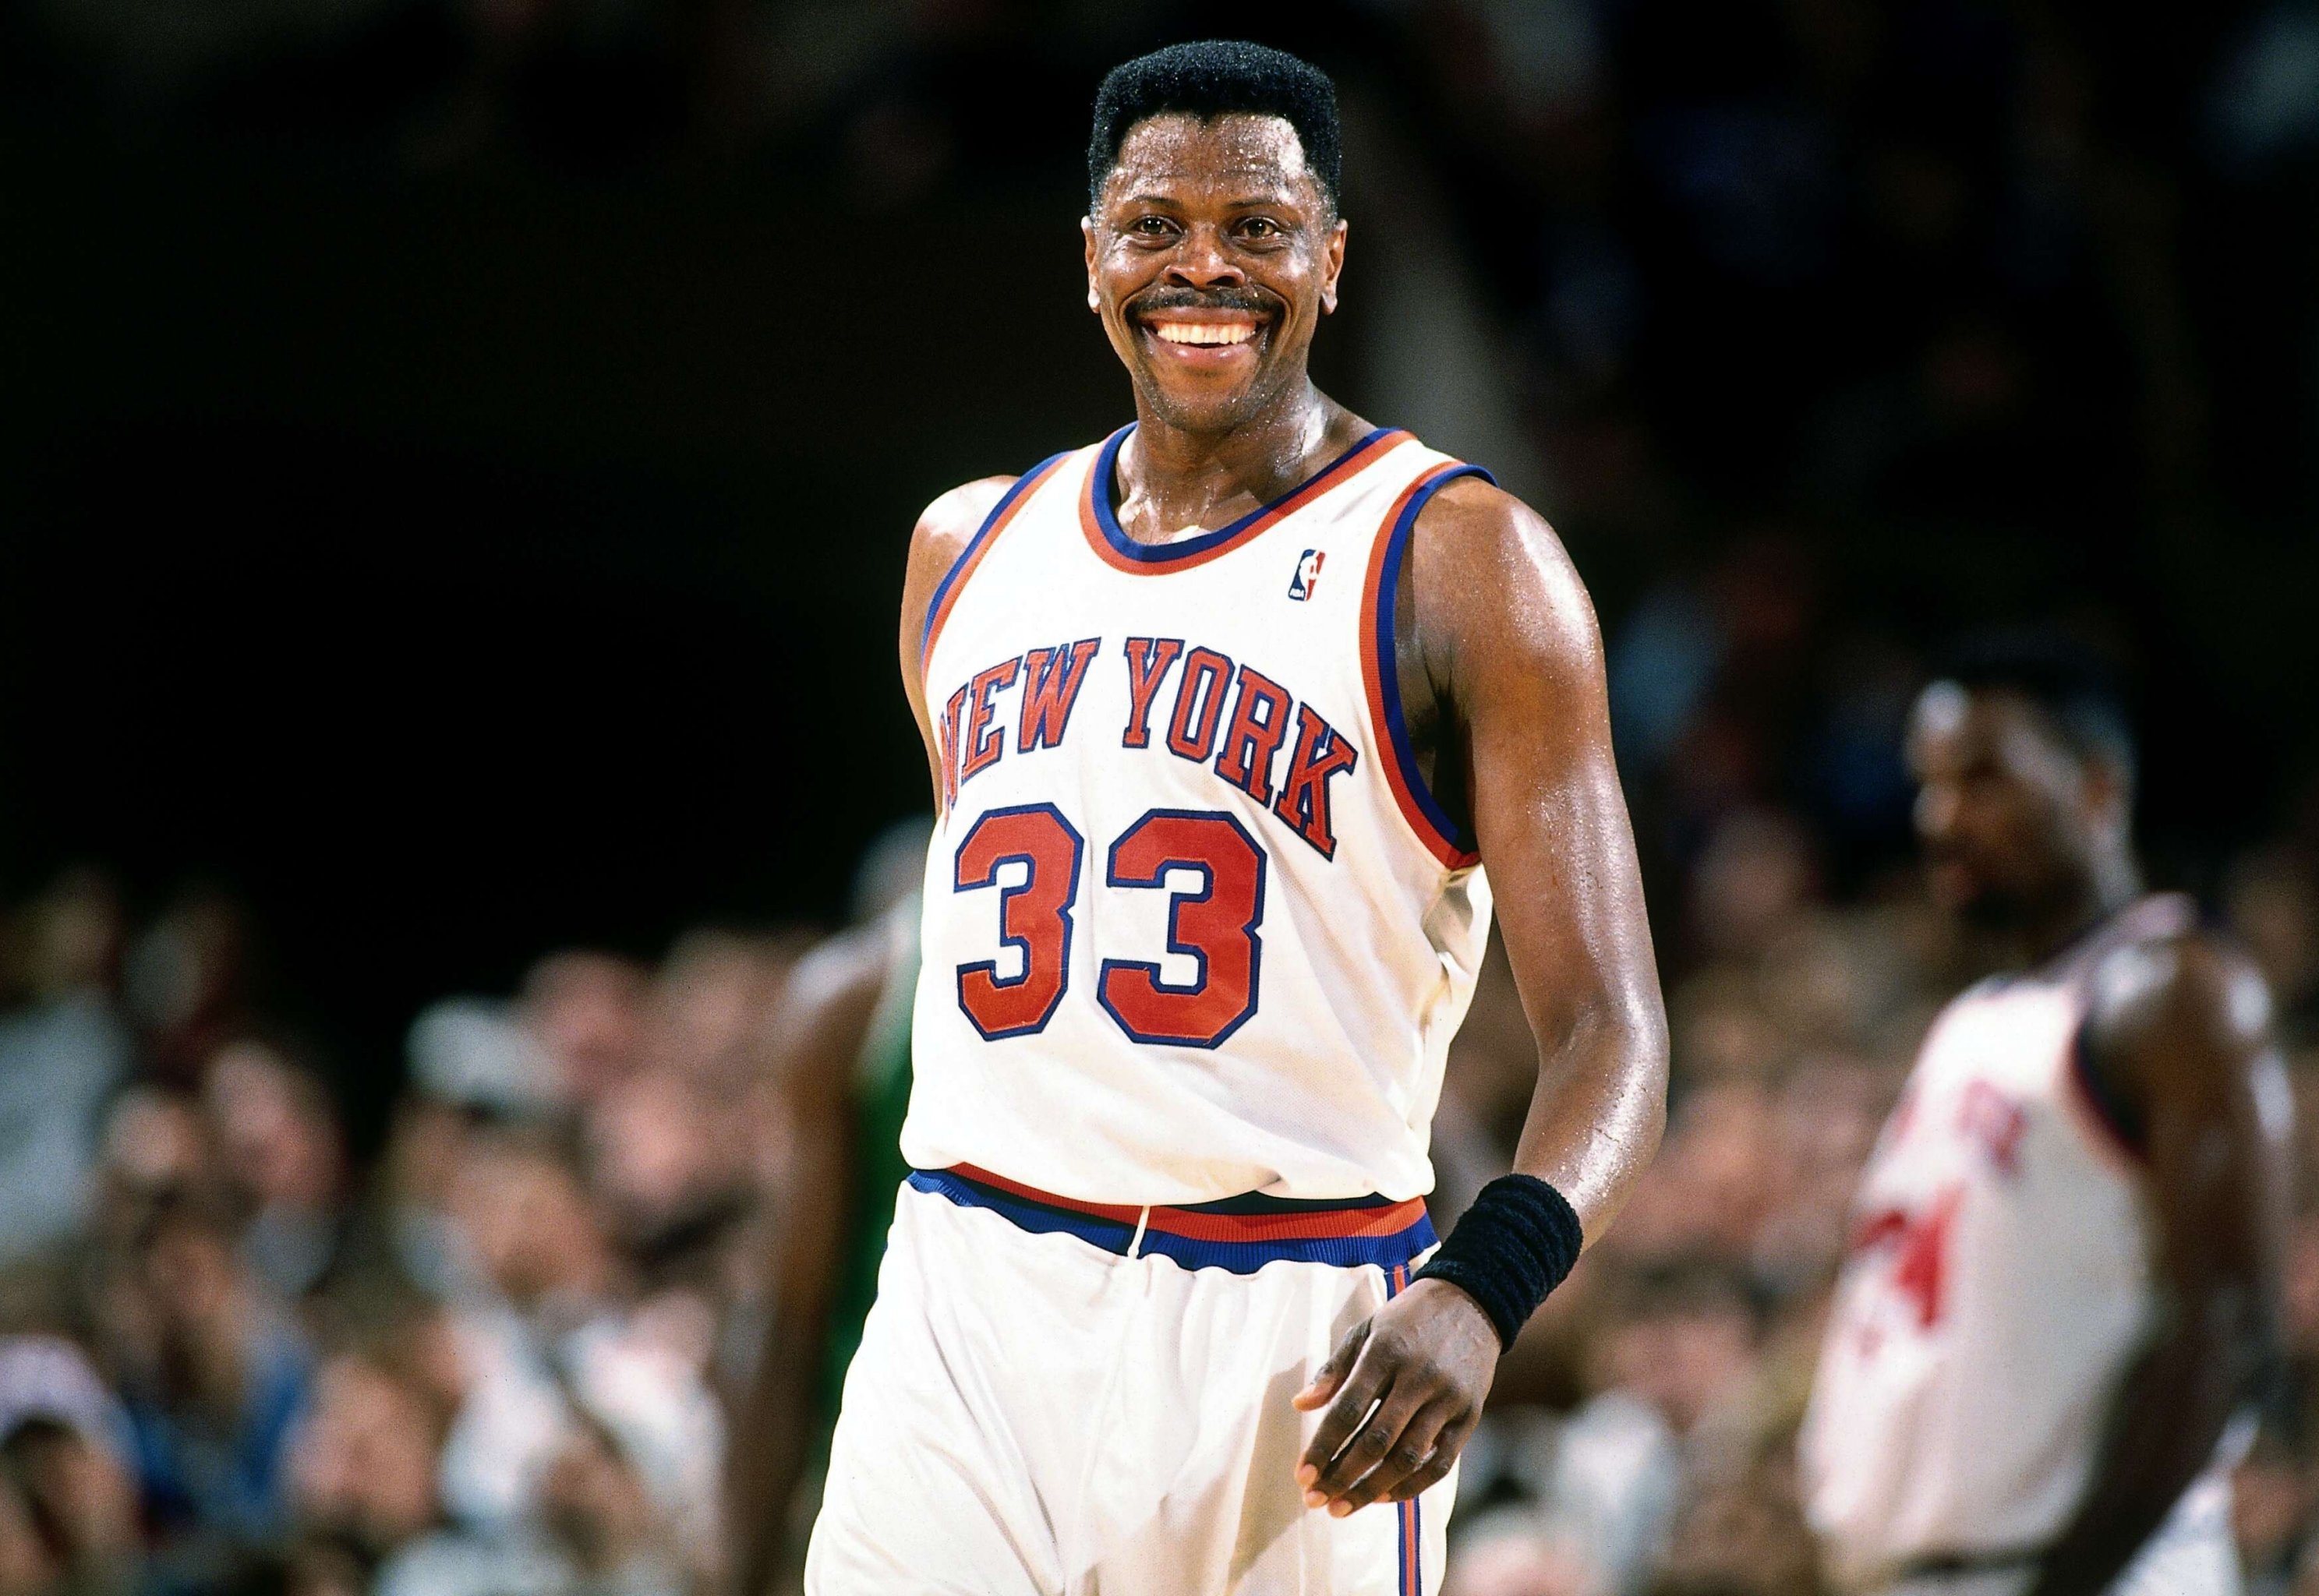 Patrick Ewing: College basketball stats, best moments, quotes